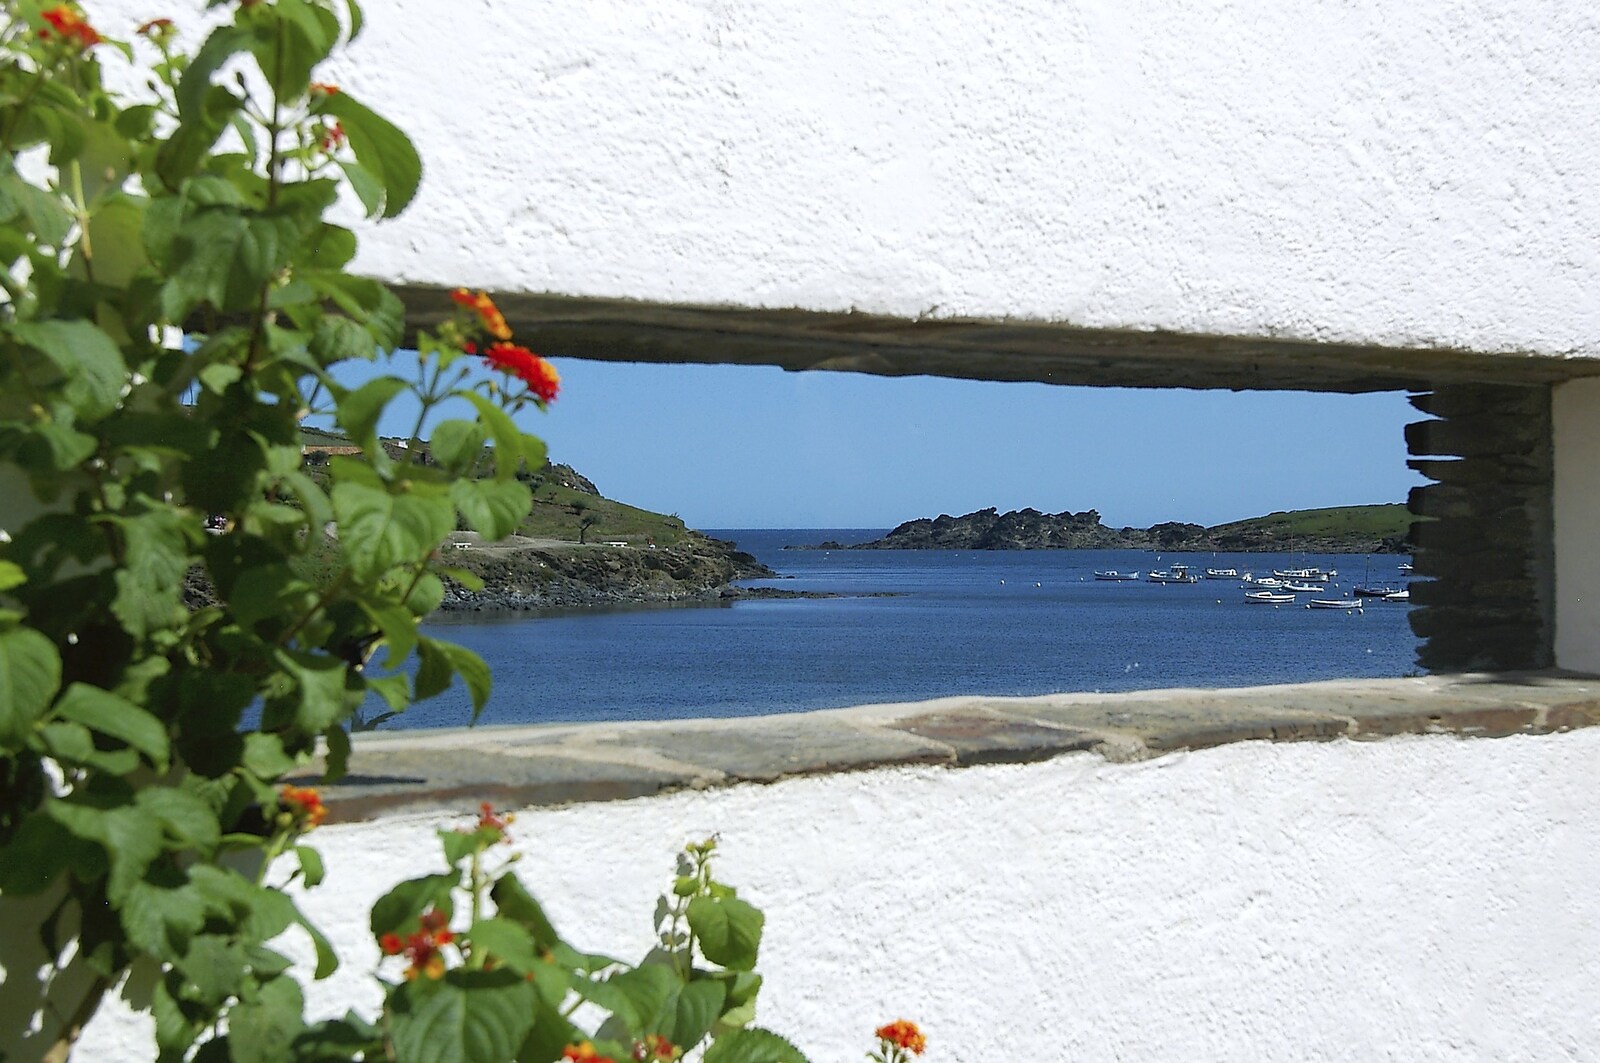 Peering out through the picture-frame wall from Salvador Dalí's House, Port Lligat, Spain - 19th Deptember 2006